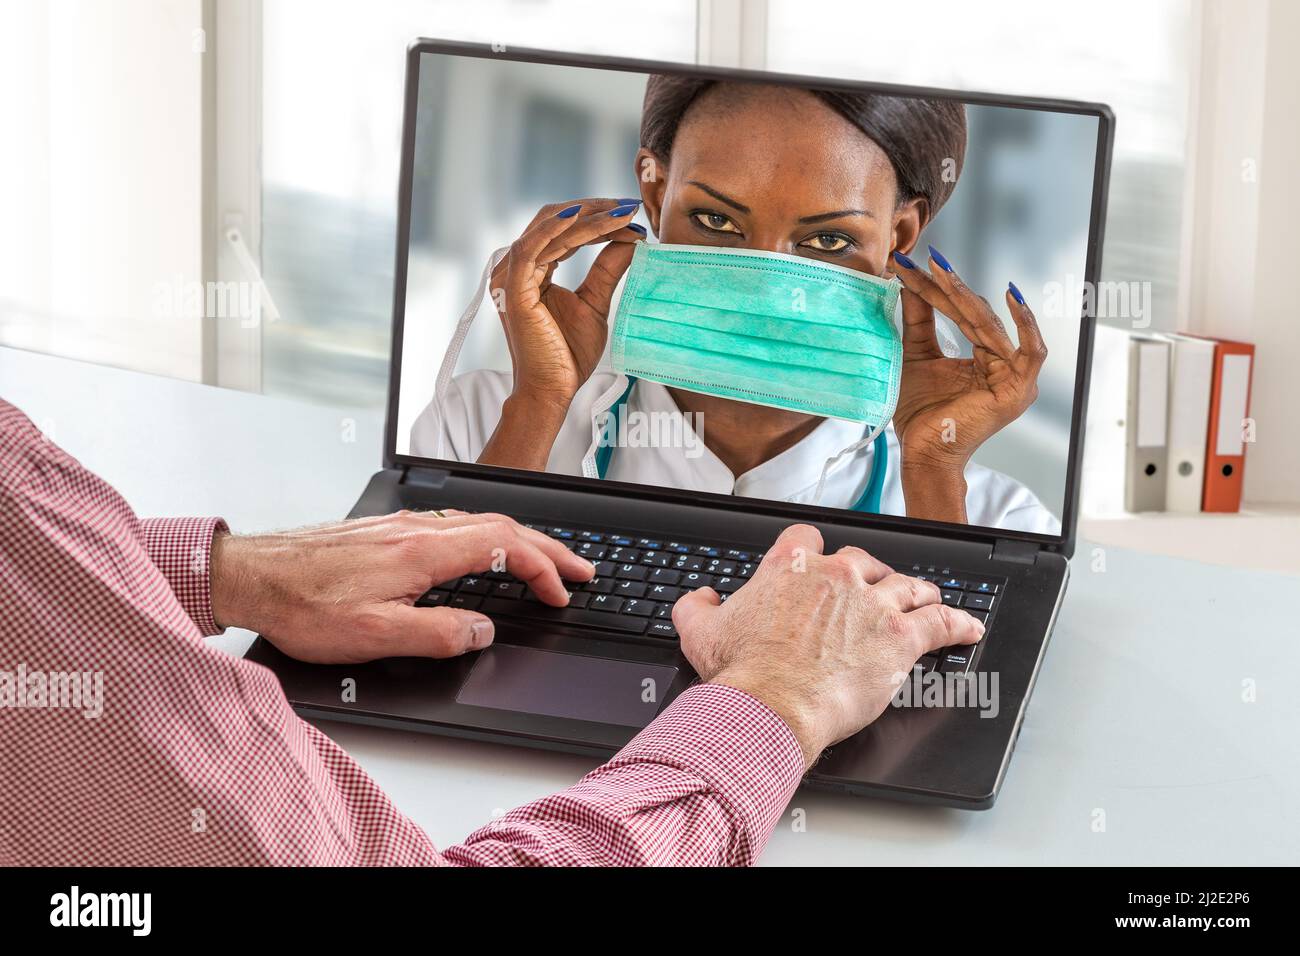 Virology protective concept. close up of senior man sit at home having online consultation with female nurse on how using proctective mask Stock Photo